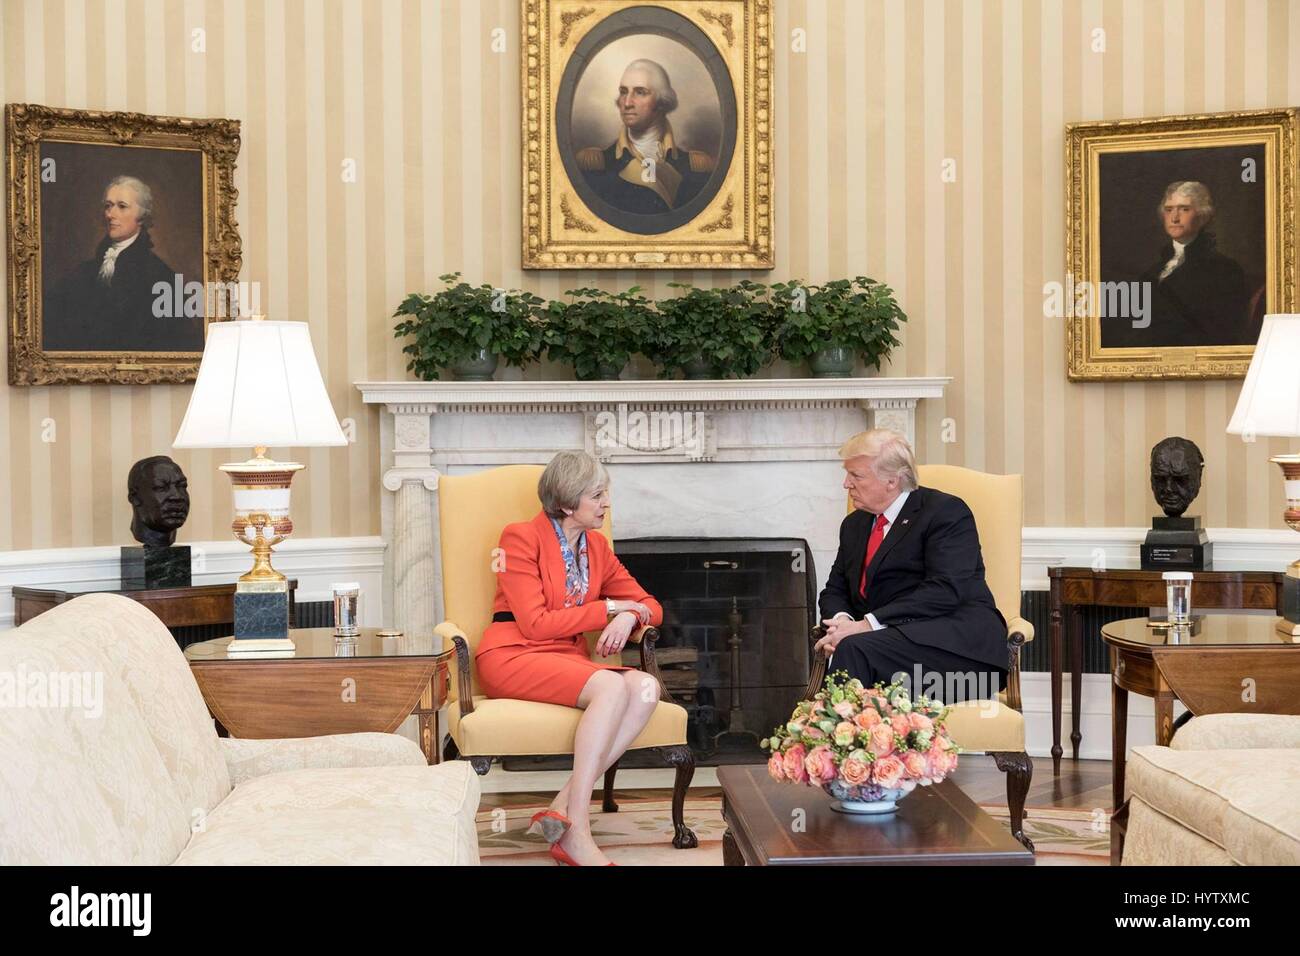 U.S President Donald Trump during his bilateral meeting with British Prime Minister Theresa May in the Oval Office of the White House January 27, 2017 in Washington, DC. Stock Photo